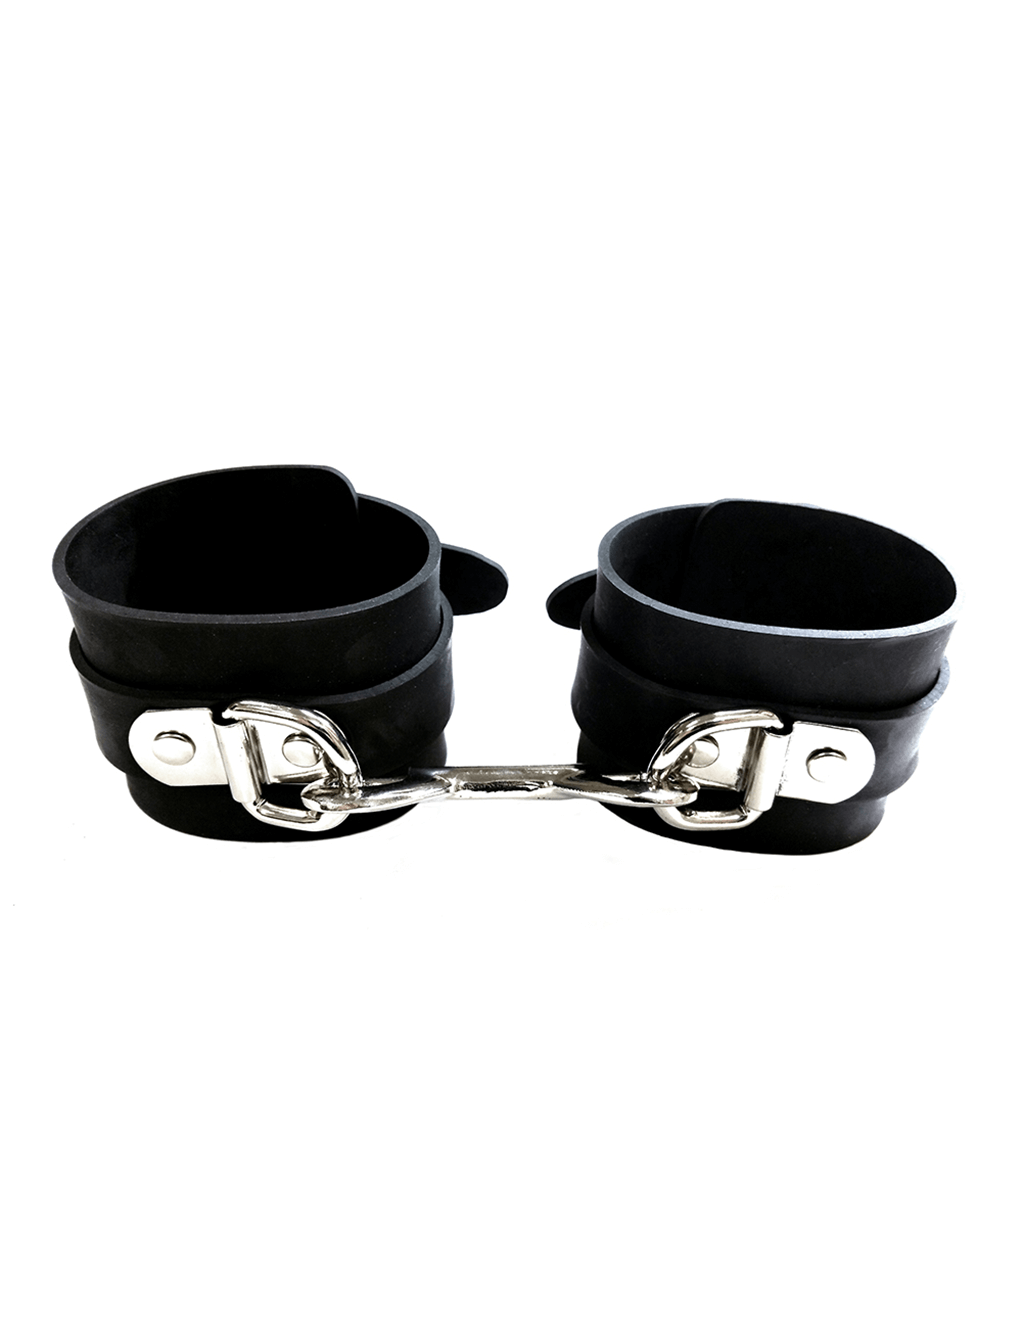 Rouge Rubber Ankle Cuffs - Black - Main